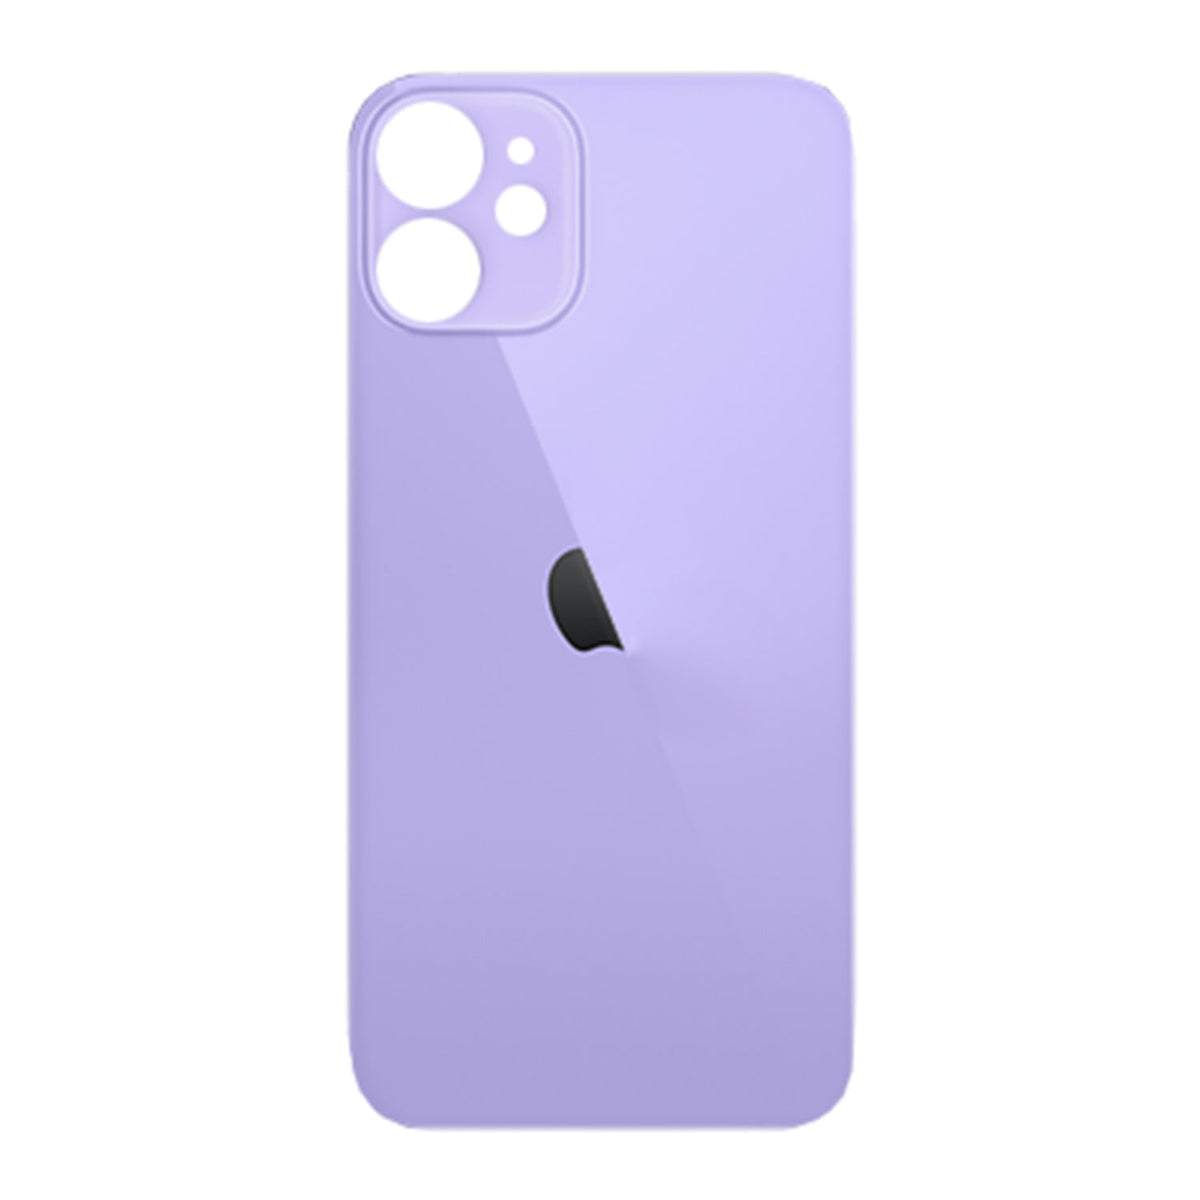 BACK COVER FOR IPHONE 12 MINI - PURPLE